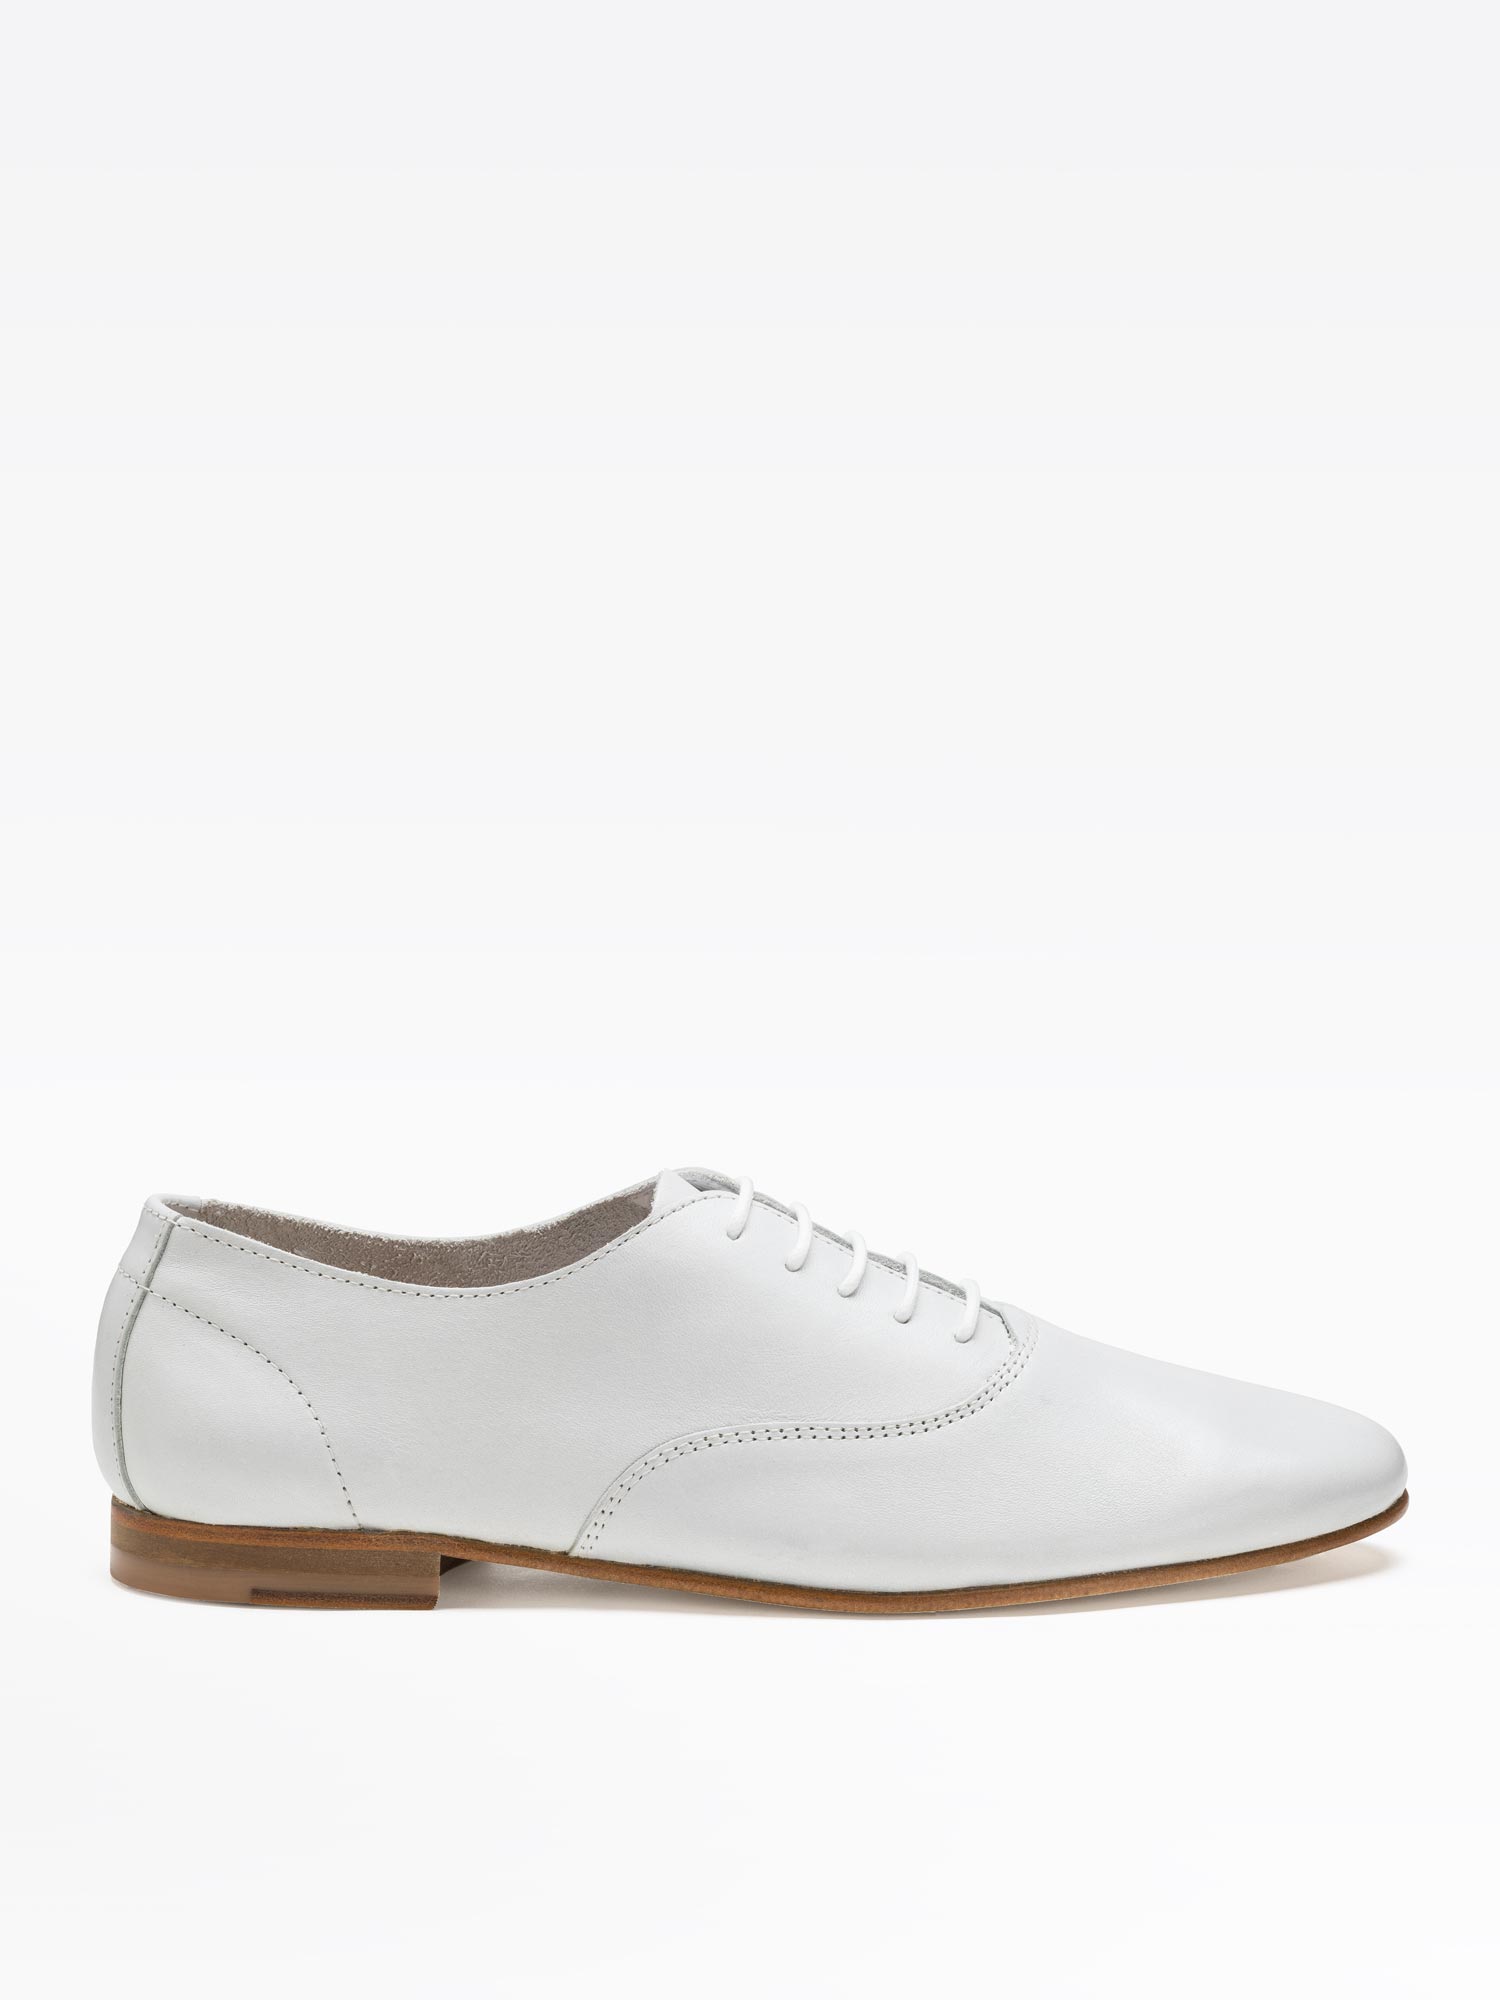 white leather alix oxford shoes